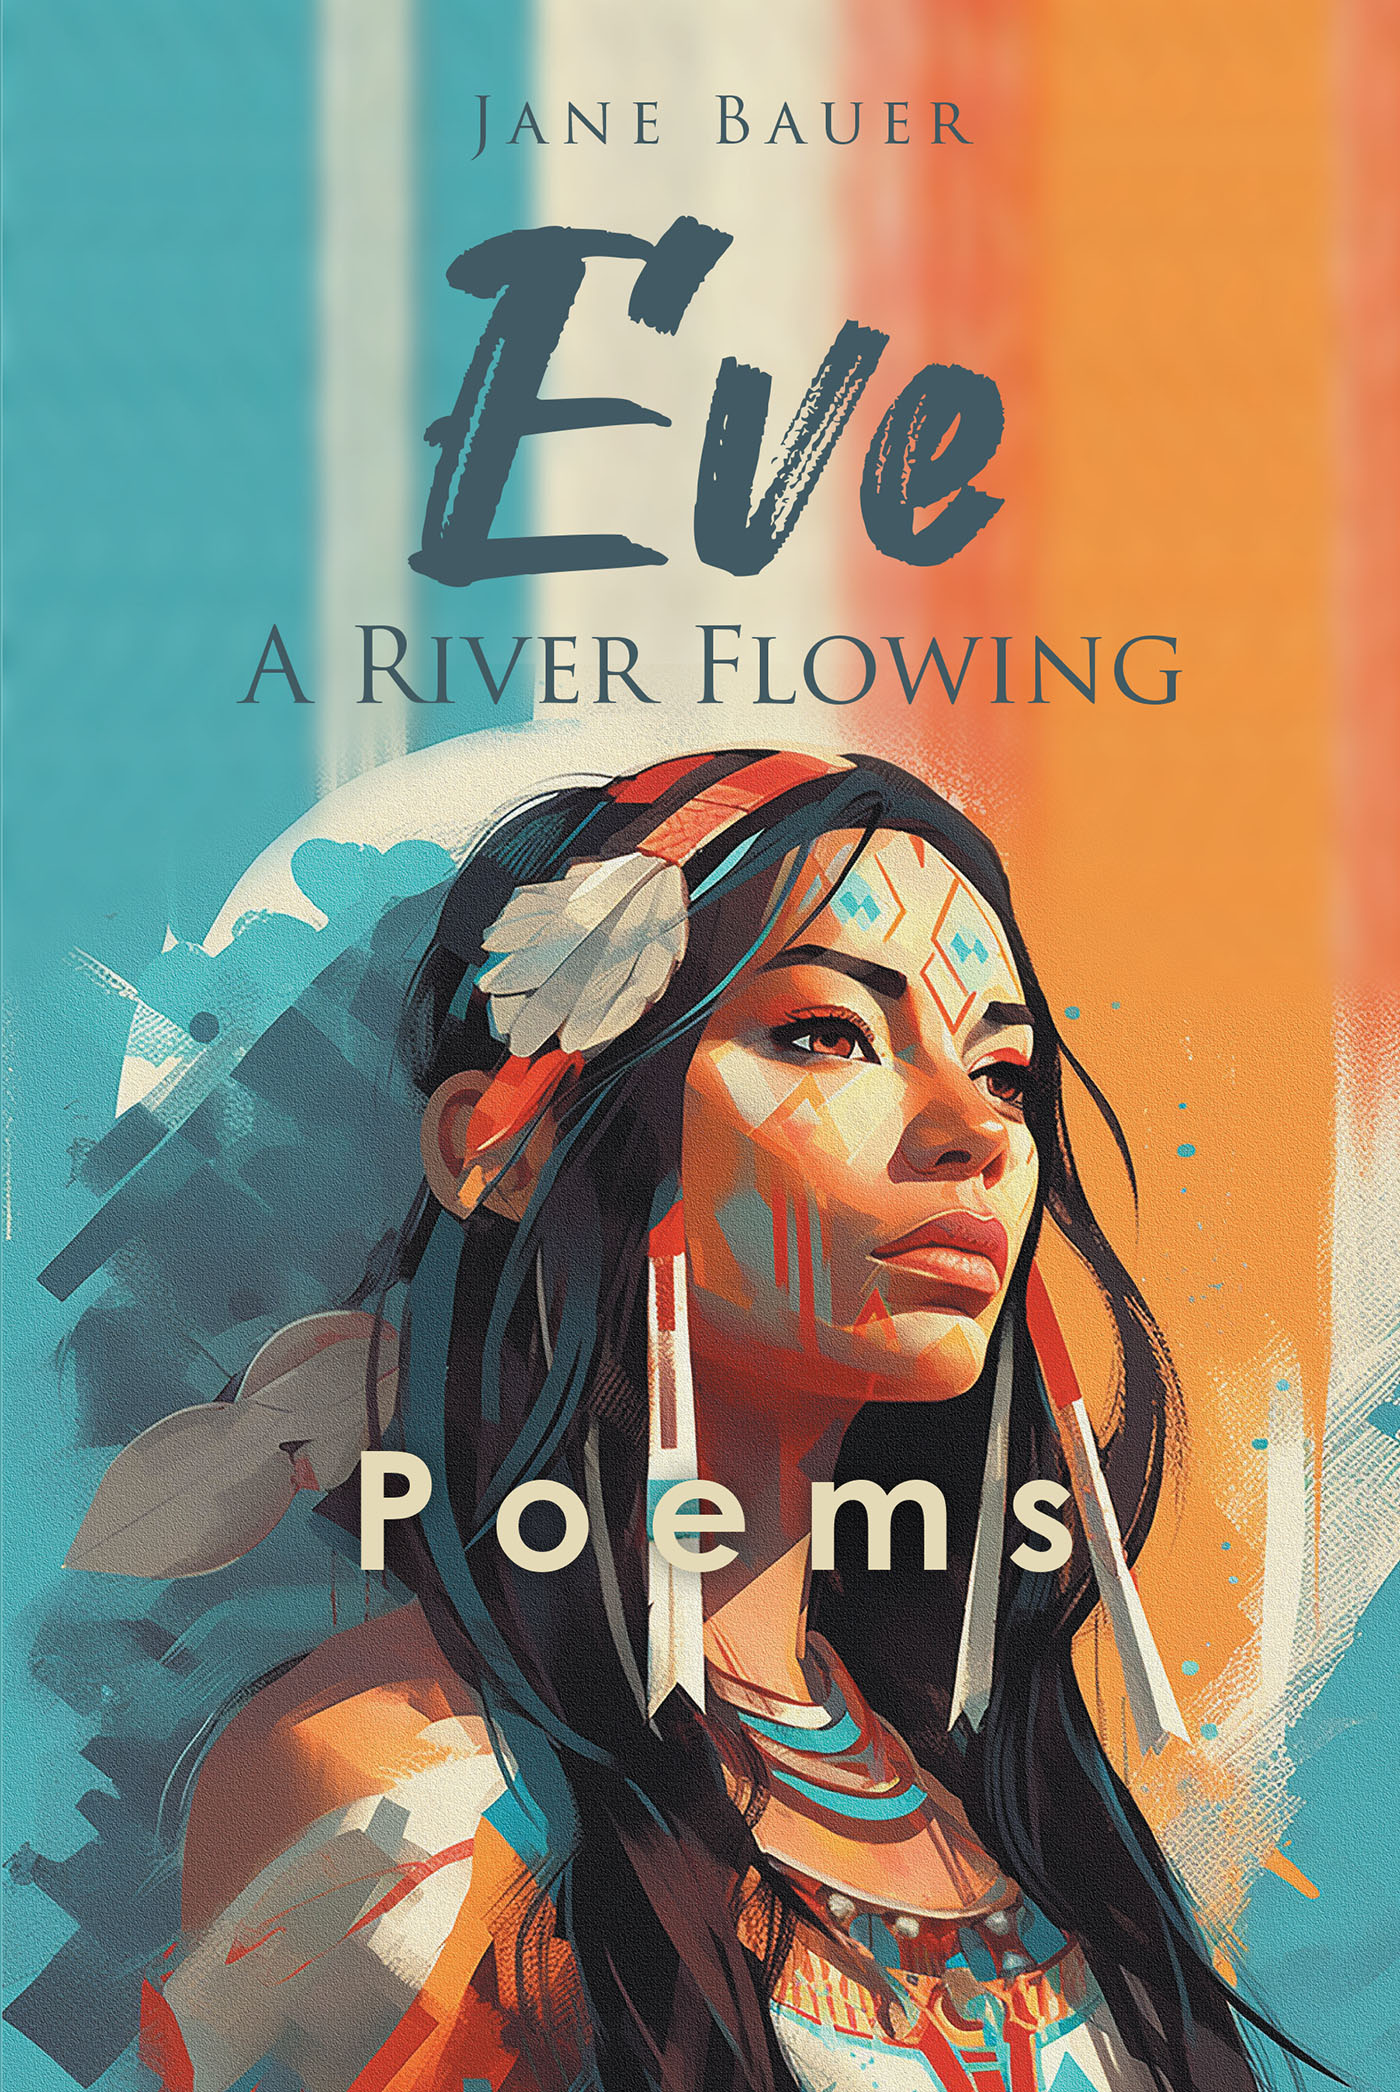 Author Jane Bauer’s New Book, "Eve—a River Flowing: Poems," is a Series of Poems Focusing on the Crisis and Comfort of Eve, the Original Woman